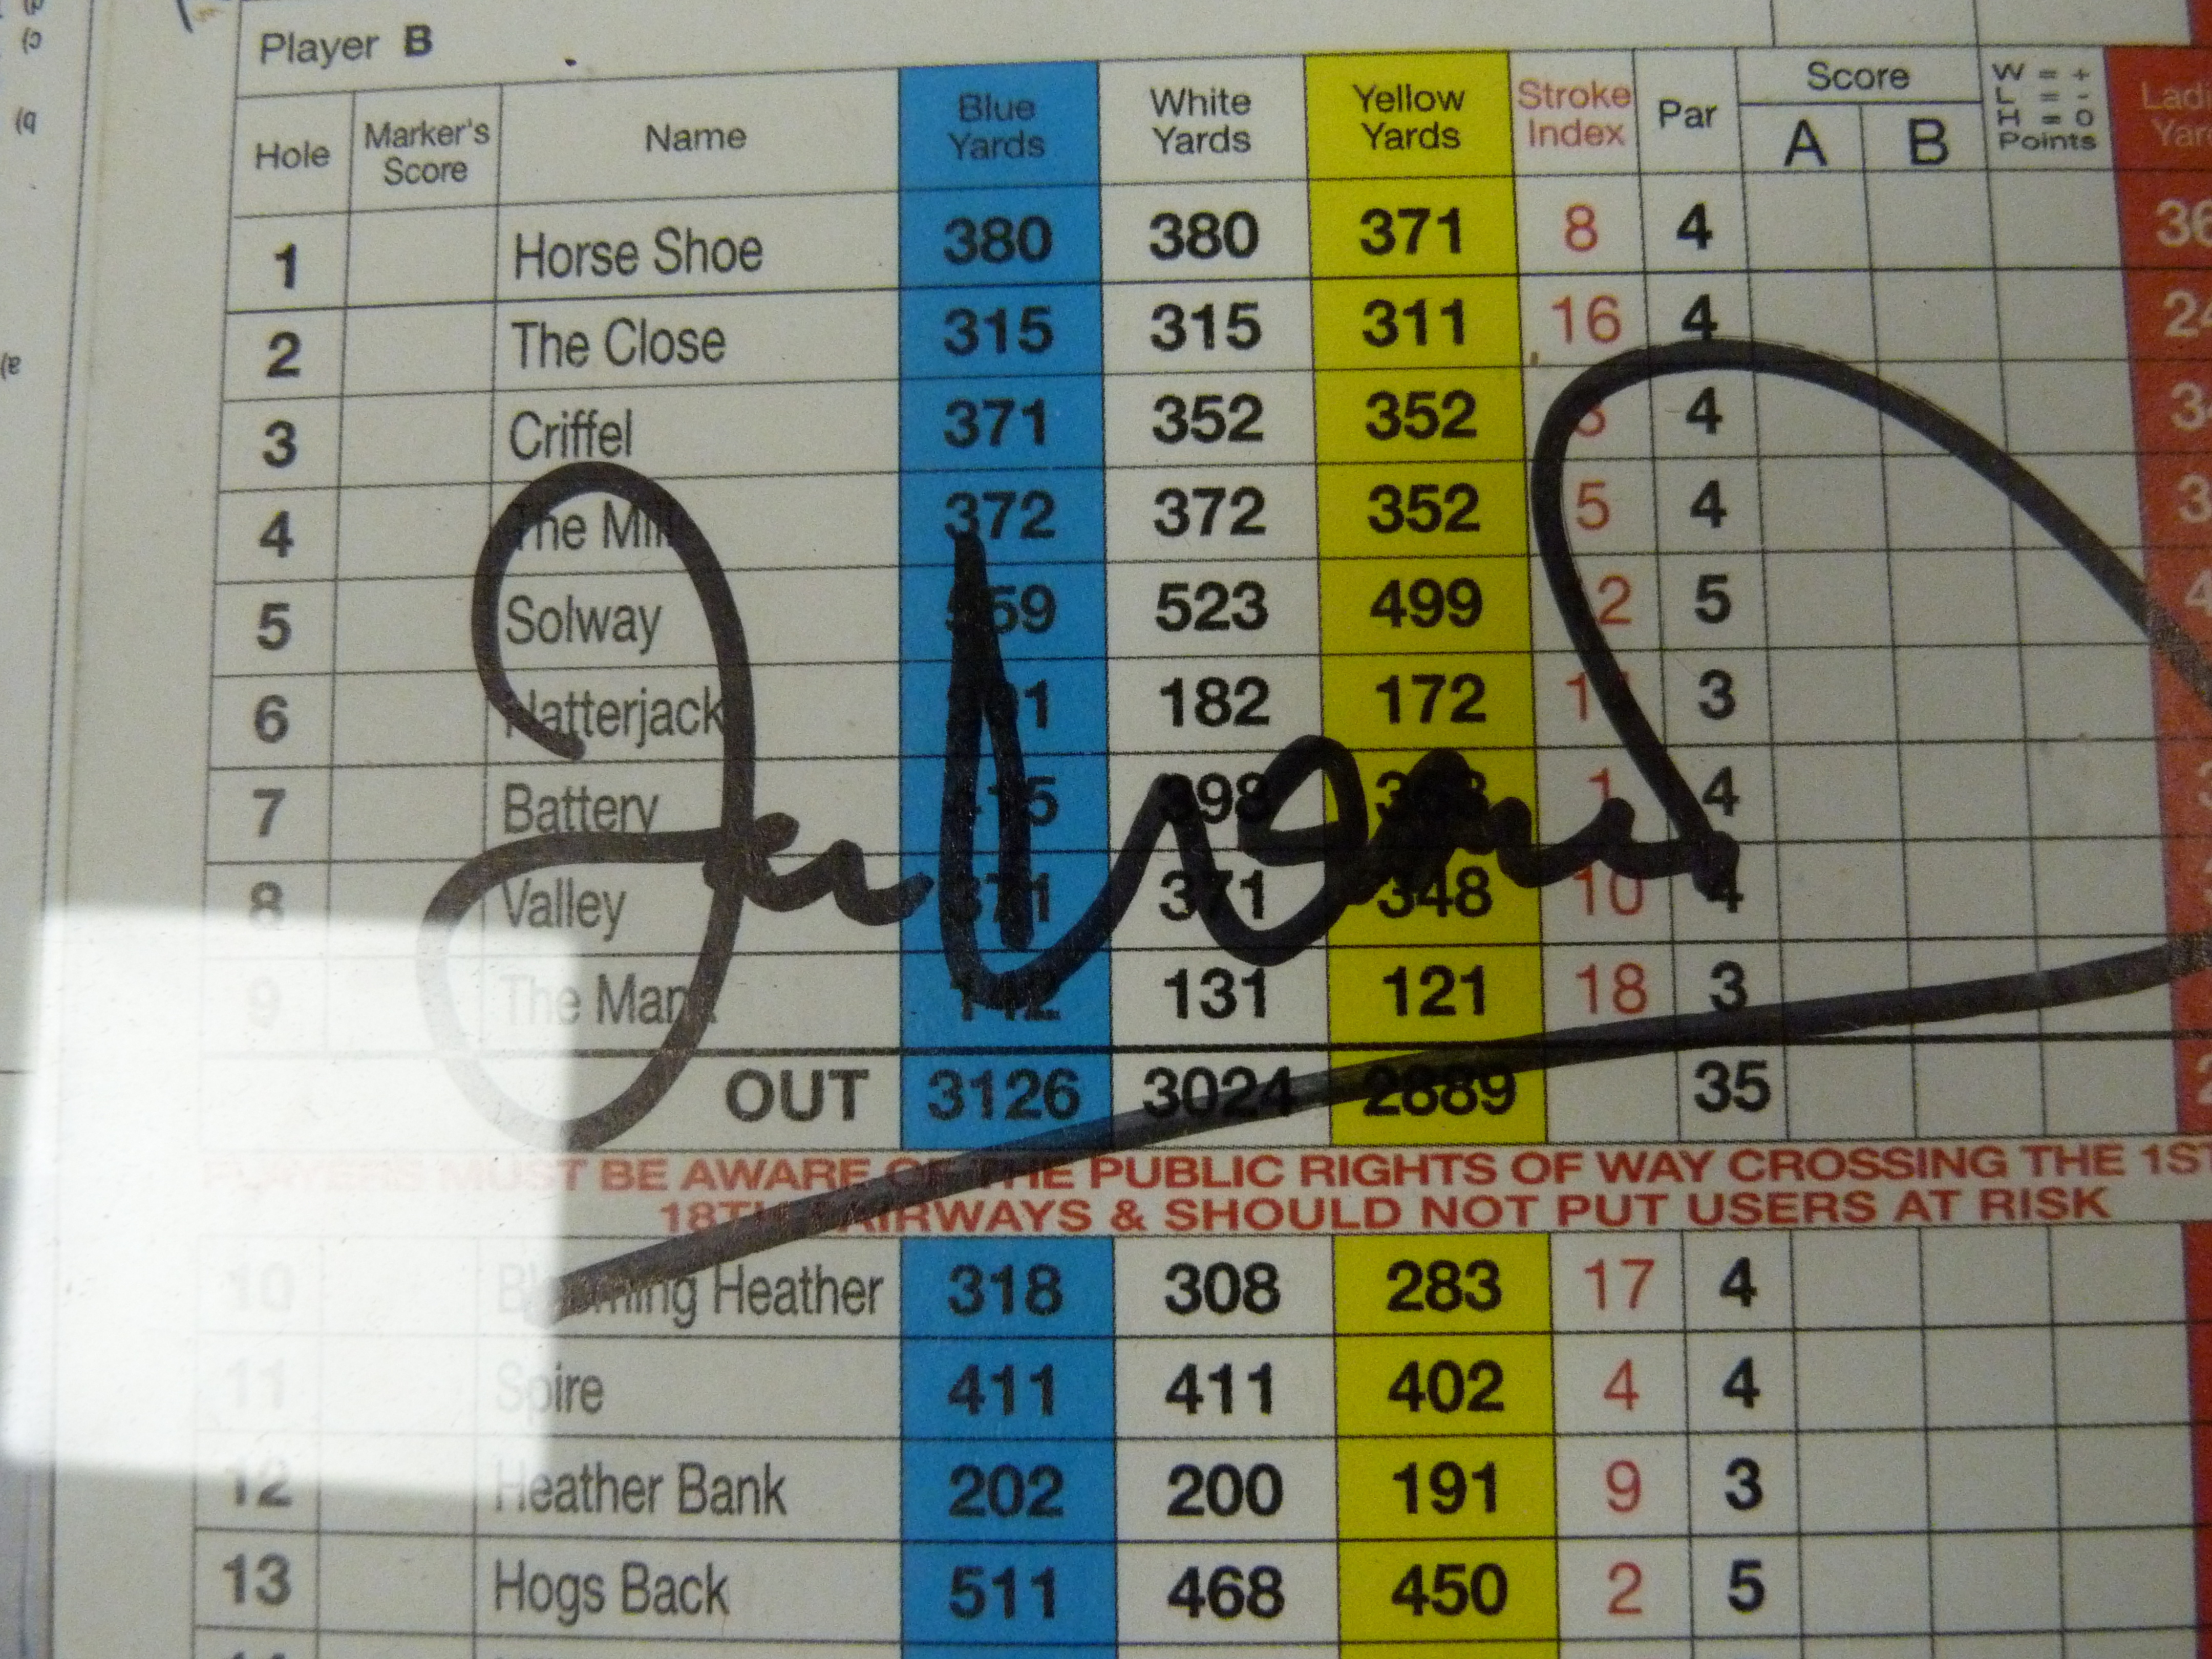 Golf Autographs.  Silloth on Solway golf club score card with autographs of Montgomerie, Woosnam & - Image 3 of 3